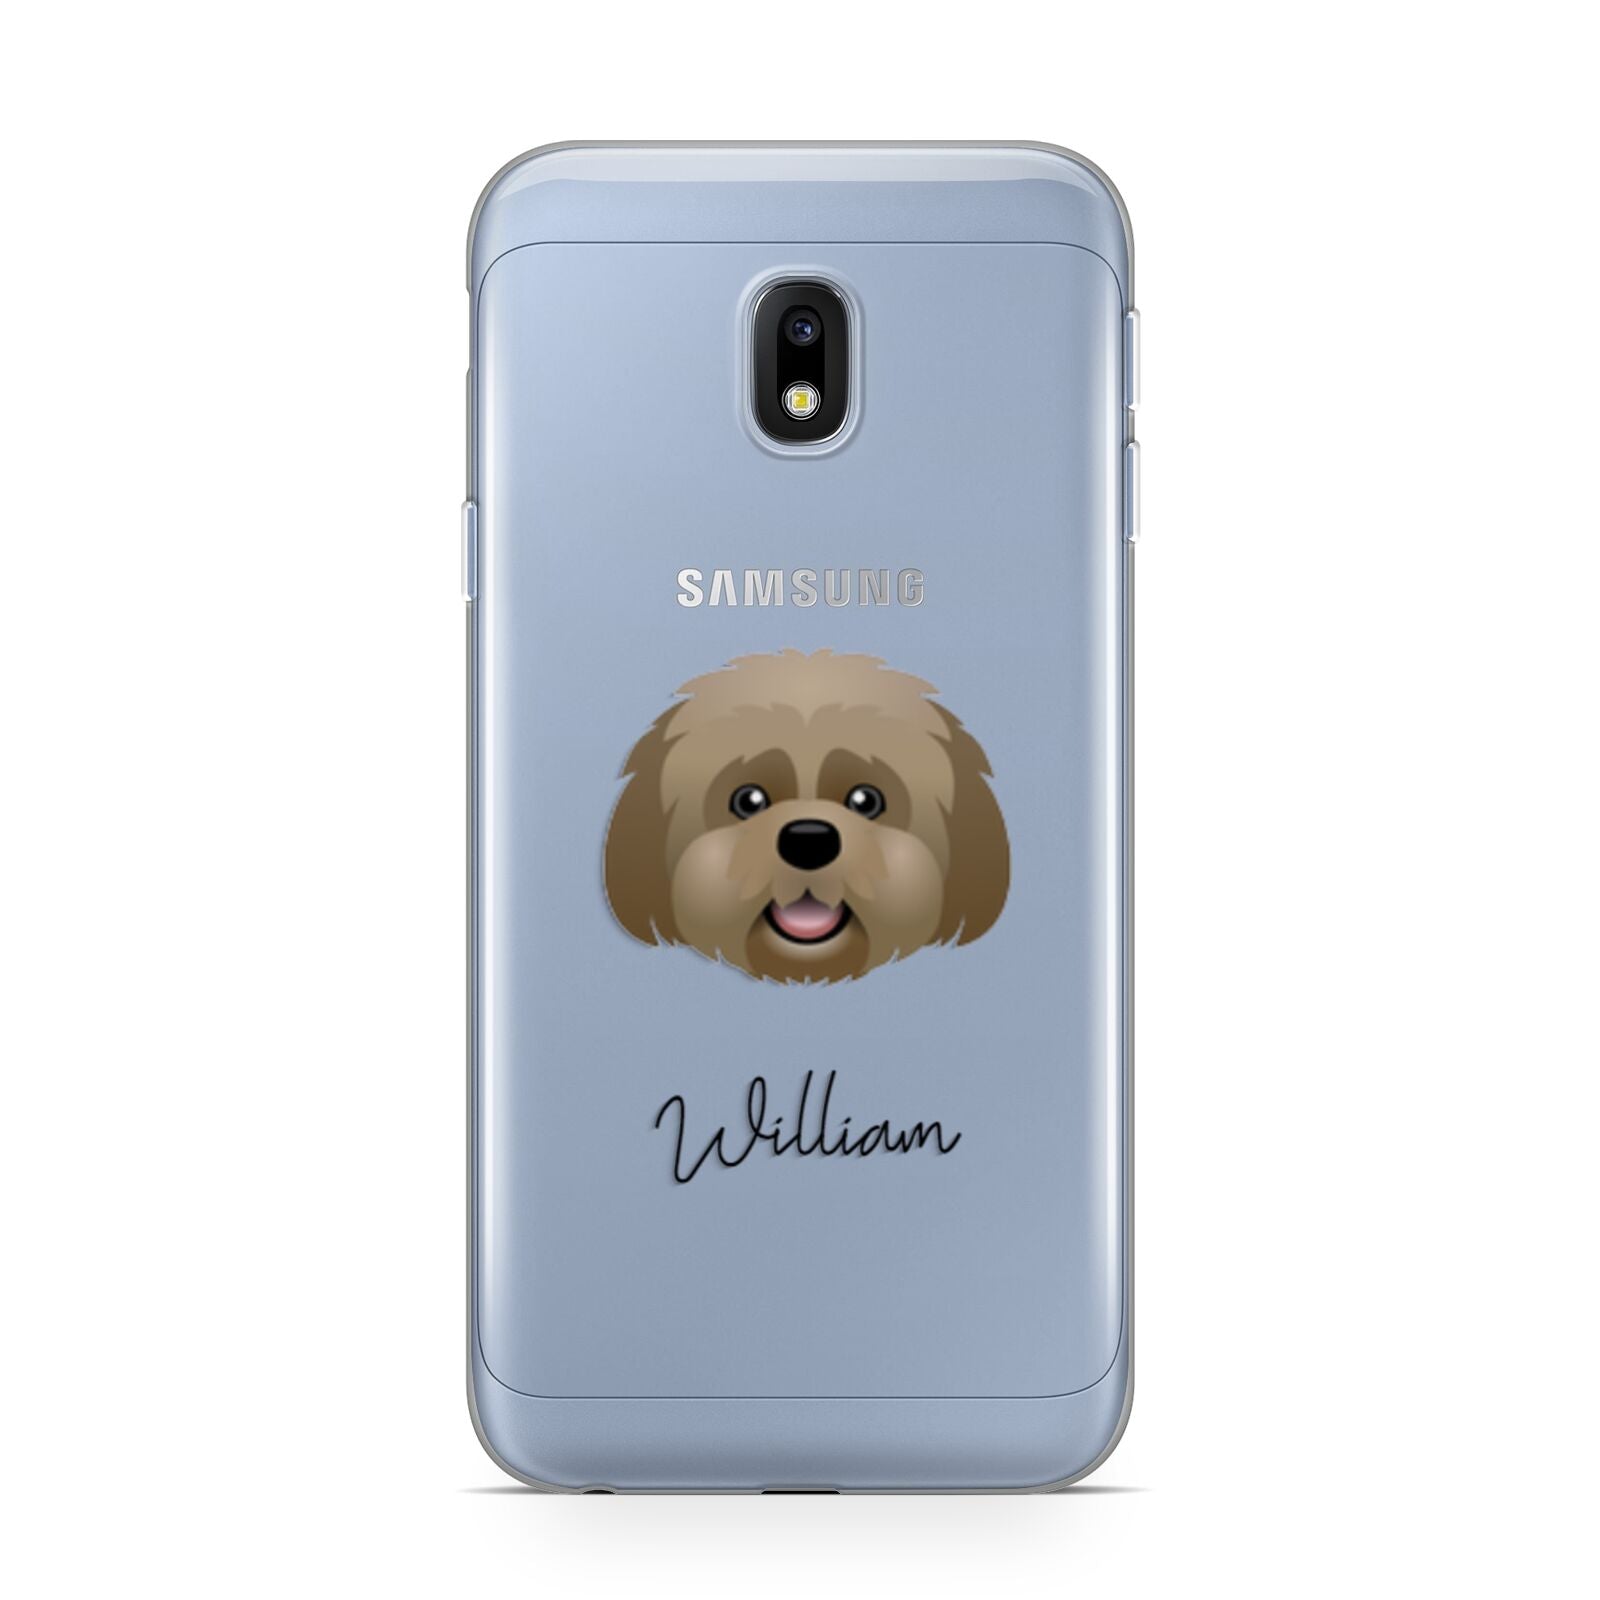 Lhatese Personalised Samsung Galaxy J3 2017 Case